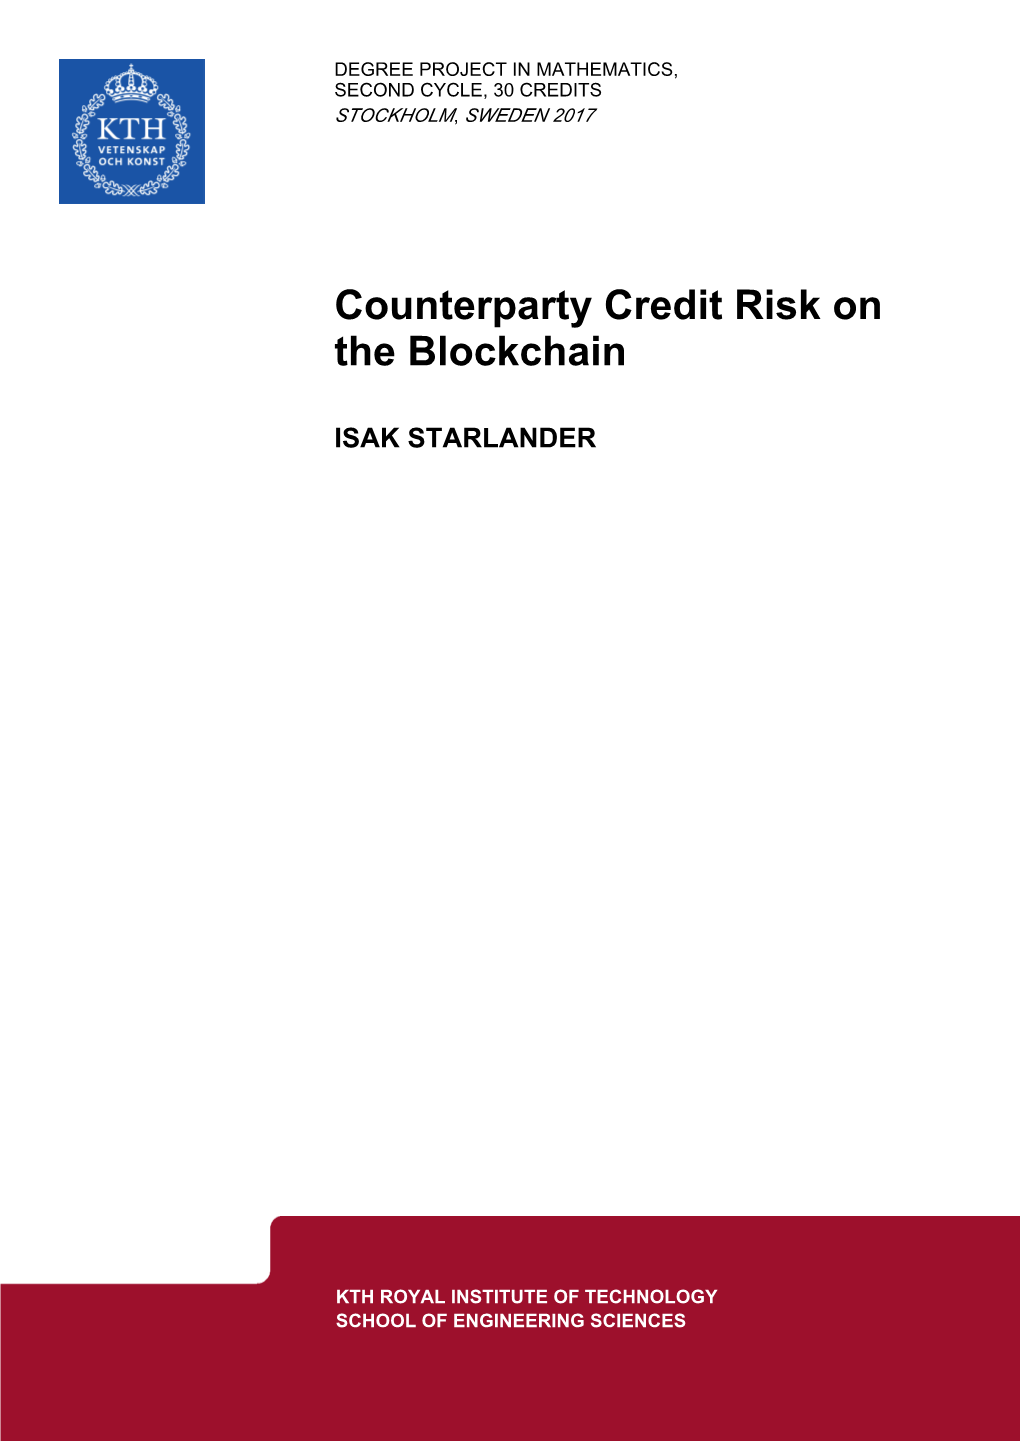 Counterparty Credit Risk on the Blockchain